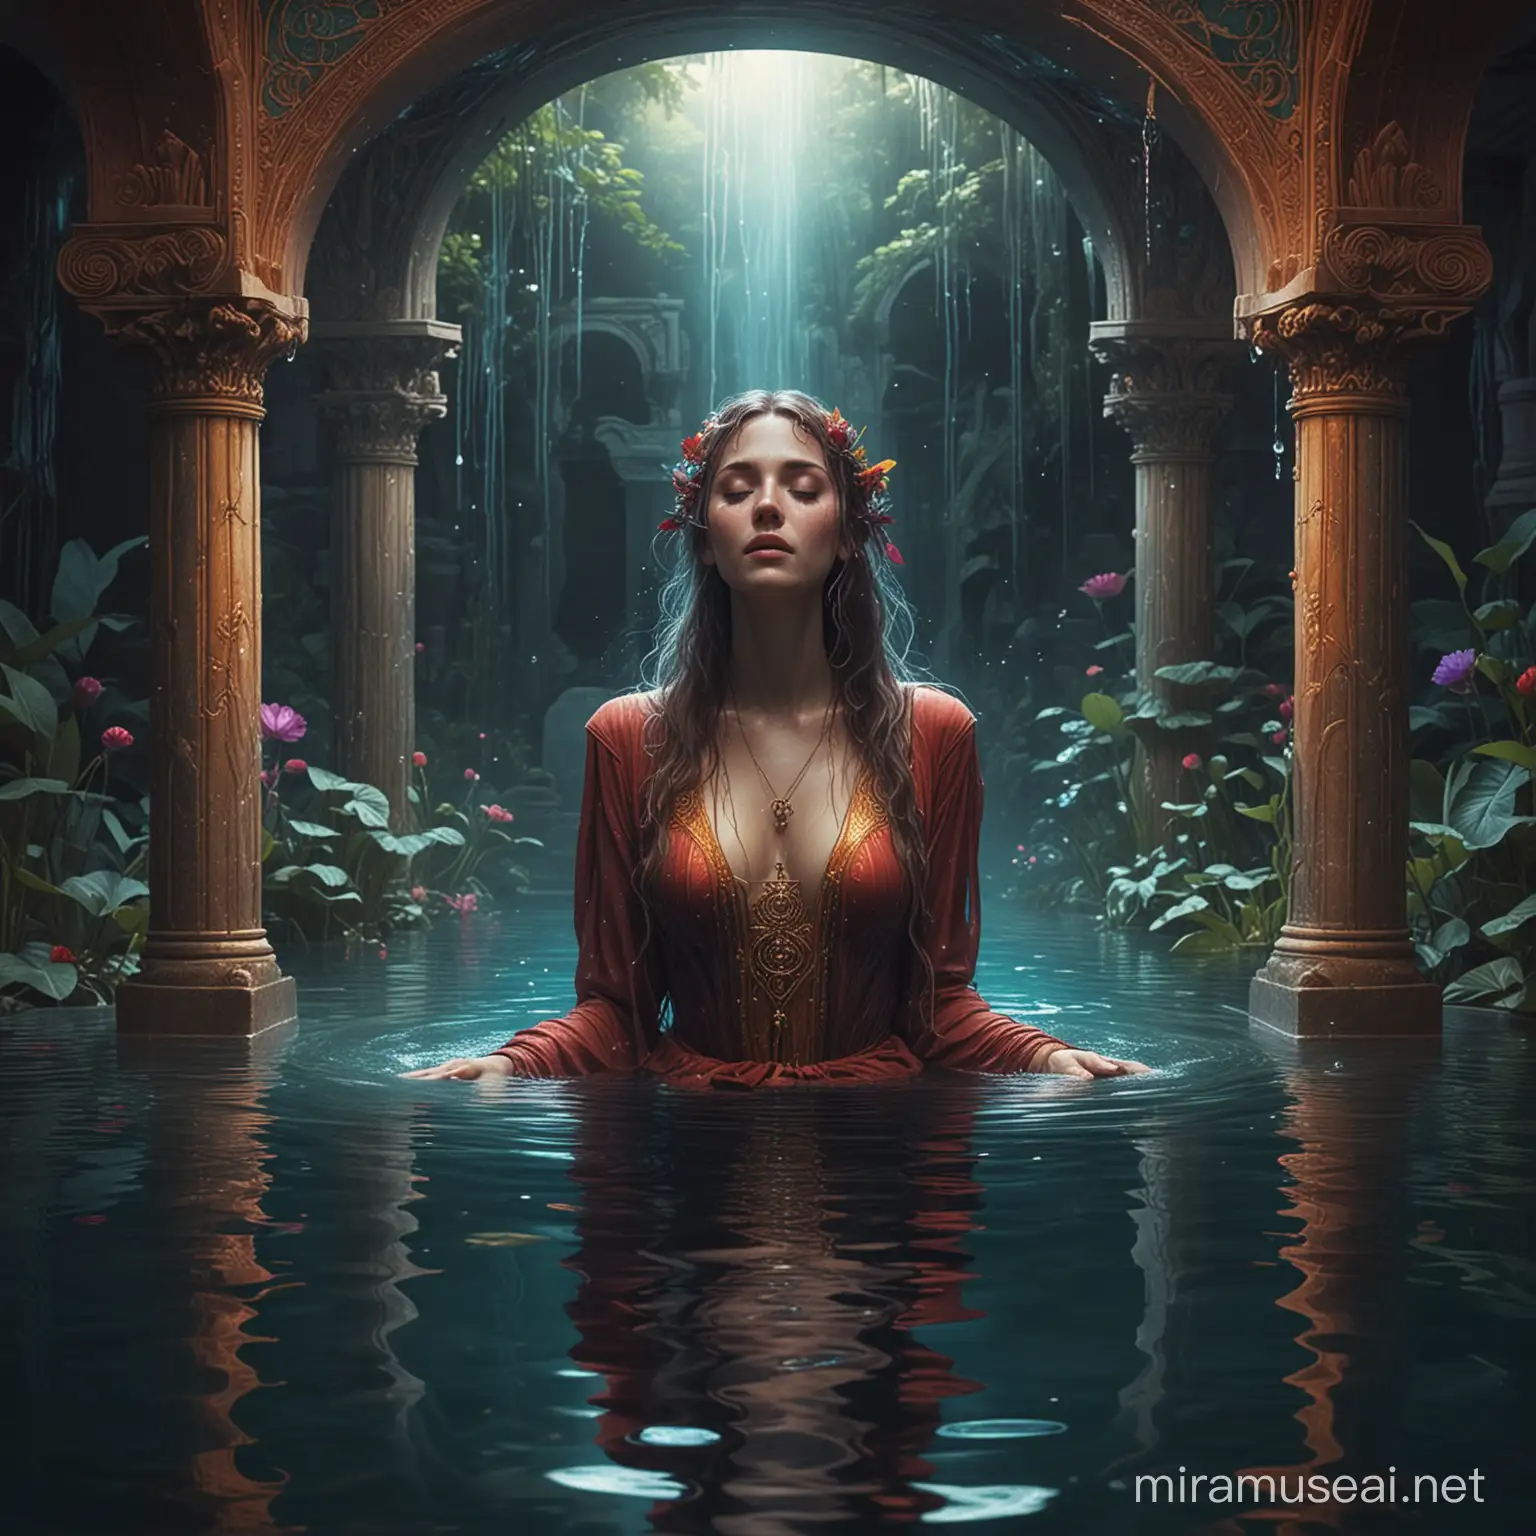 Enigmatic Oracle Crying by Mystical Waters in Art Nouveau Temple